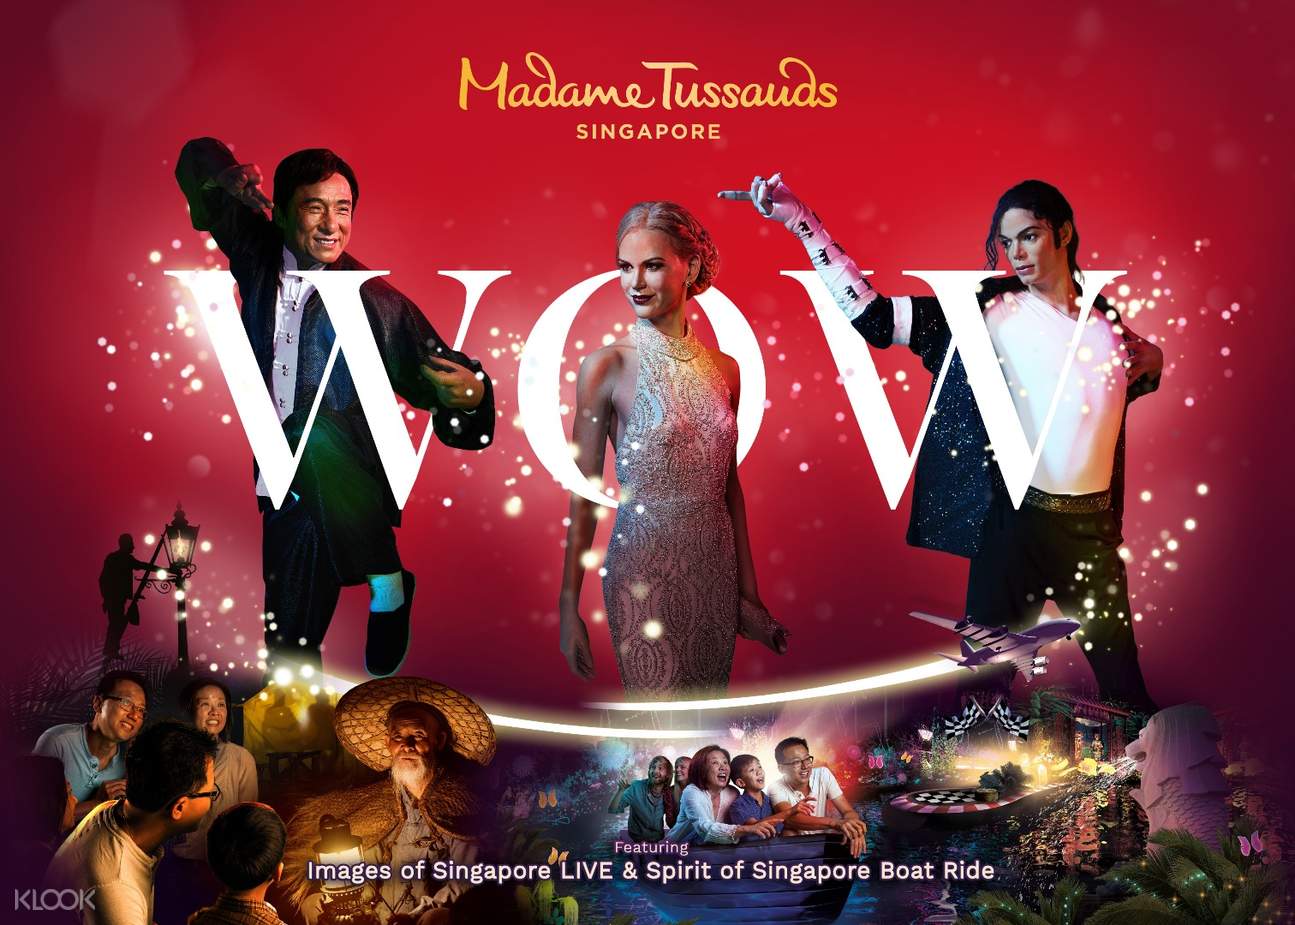 Madame Tussauds, The celebrity wax museum in Singapore